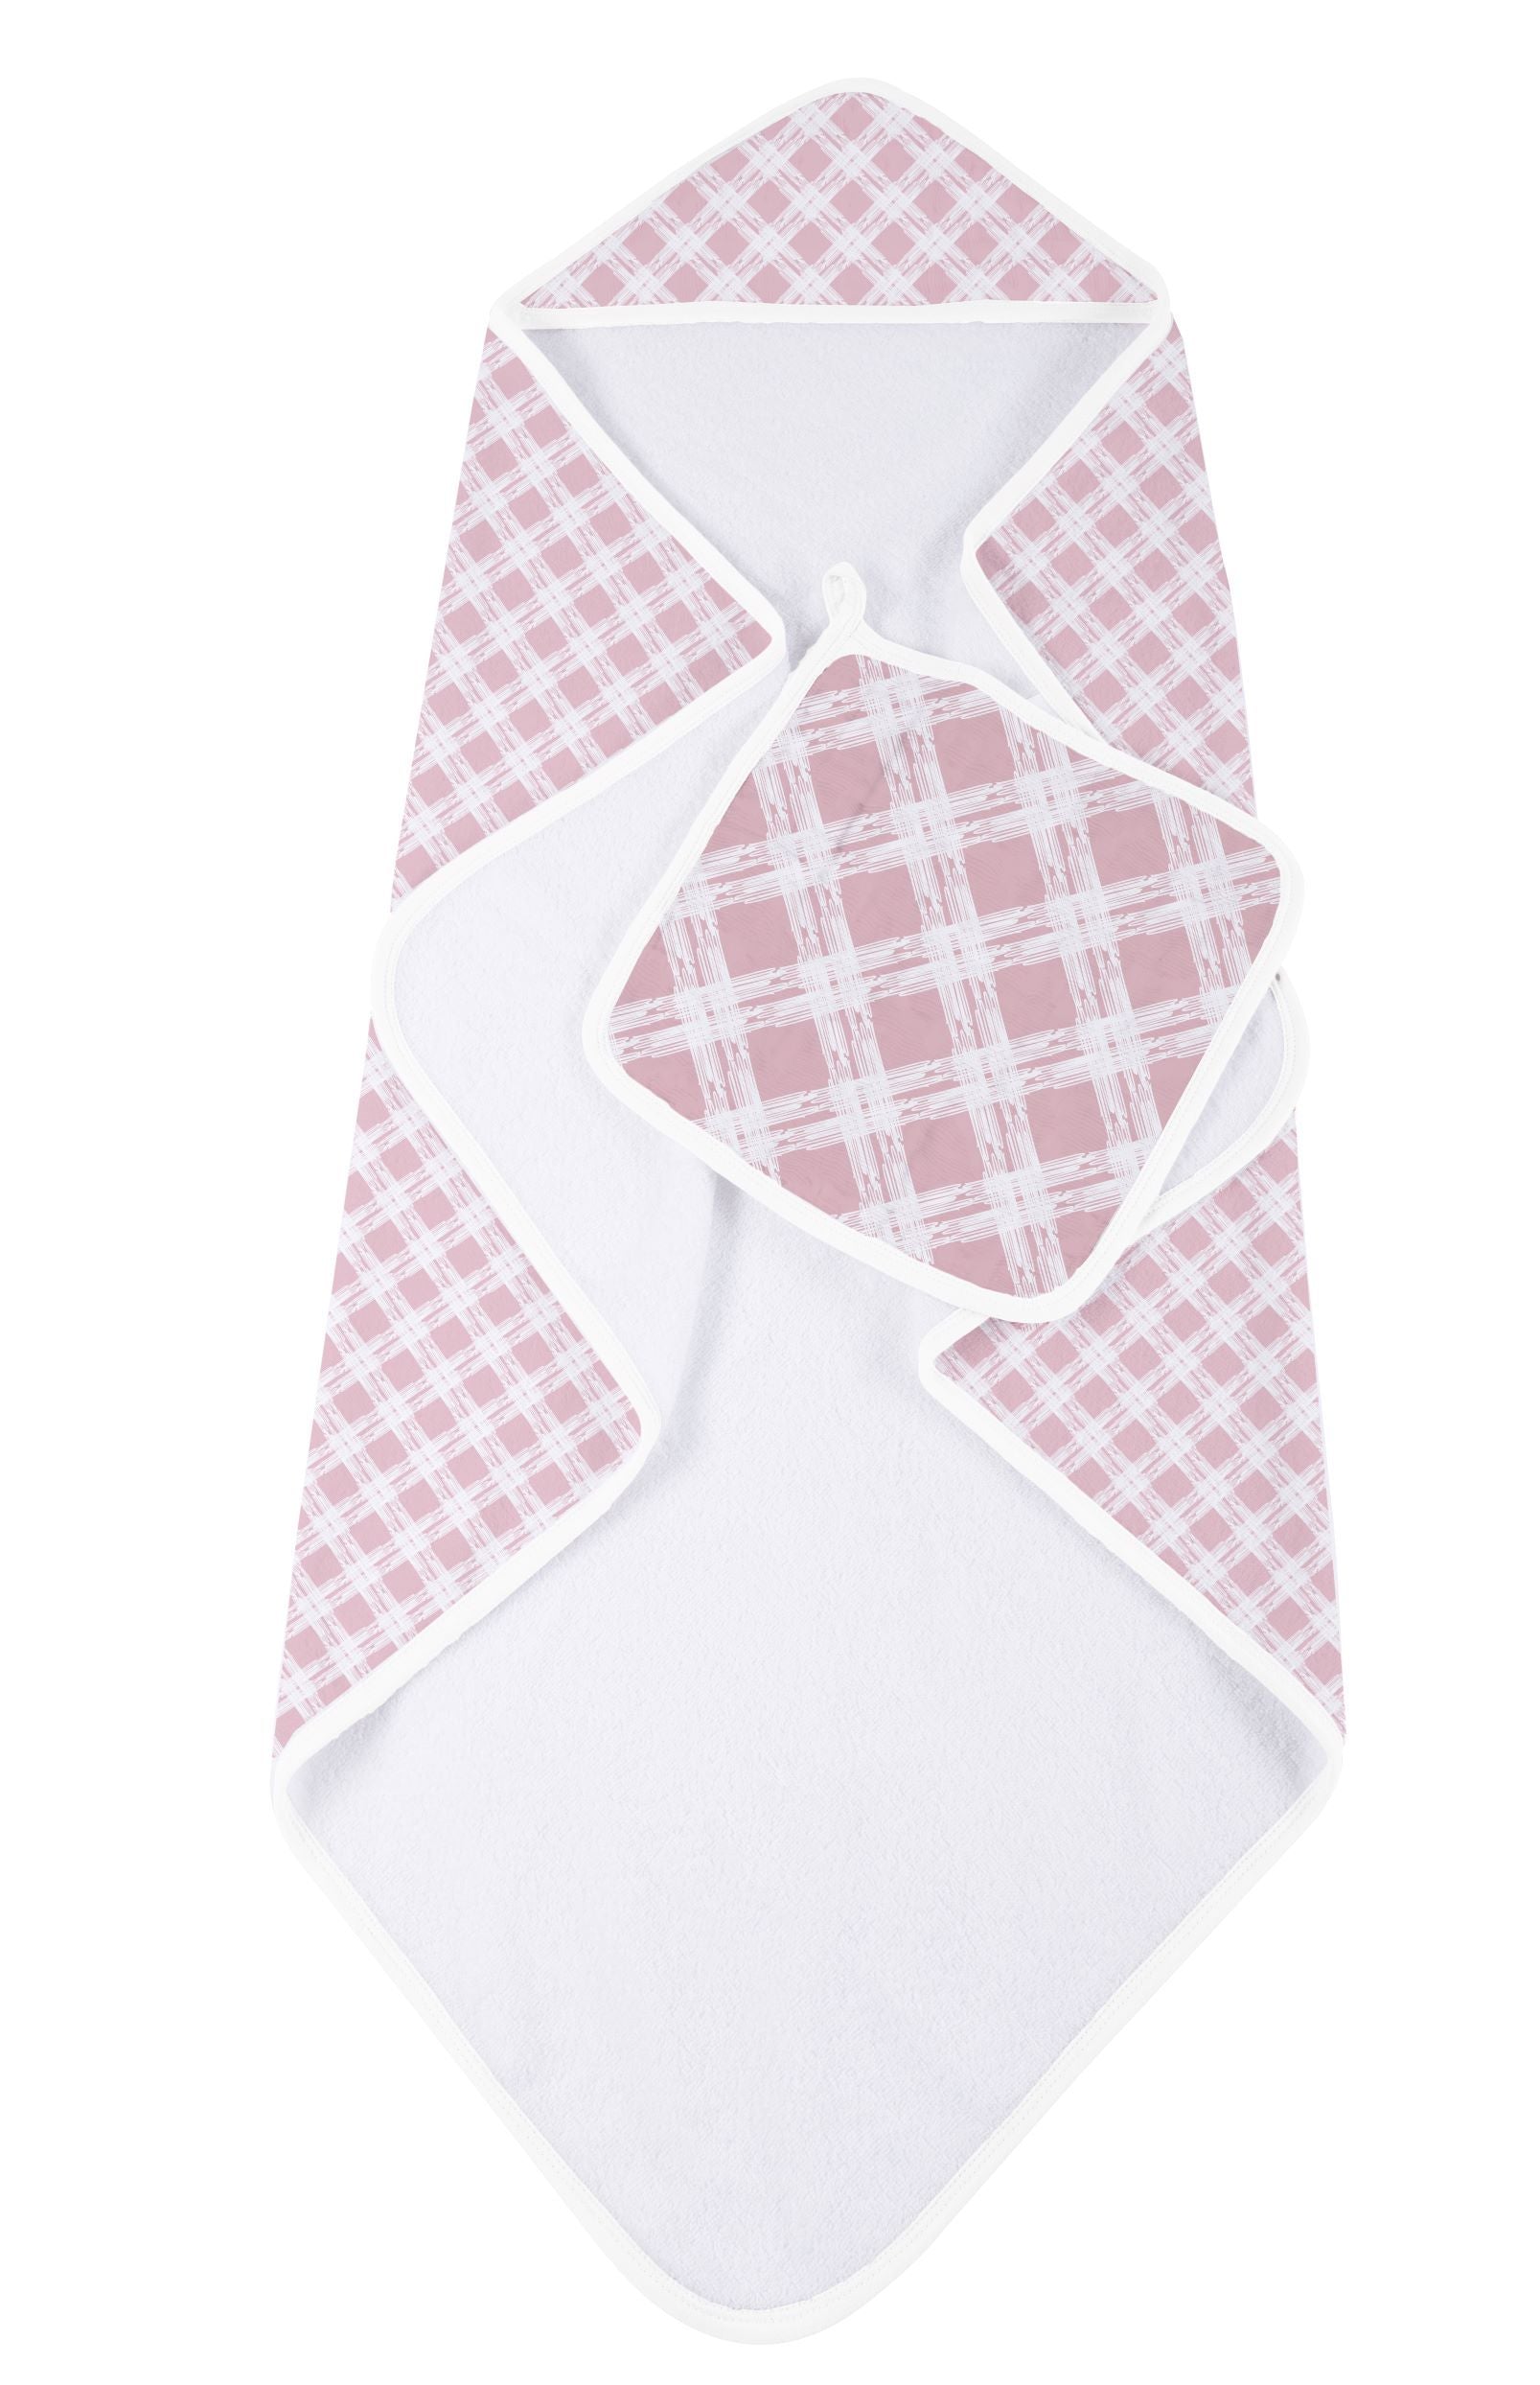 Newcastle Classics Pink Plaid Cotton Hooded Towel